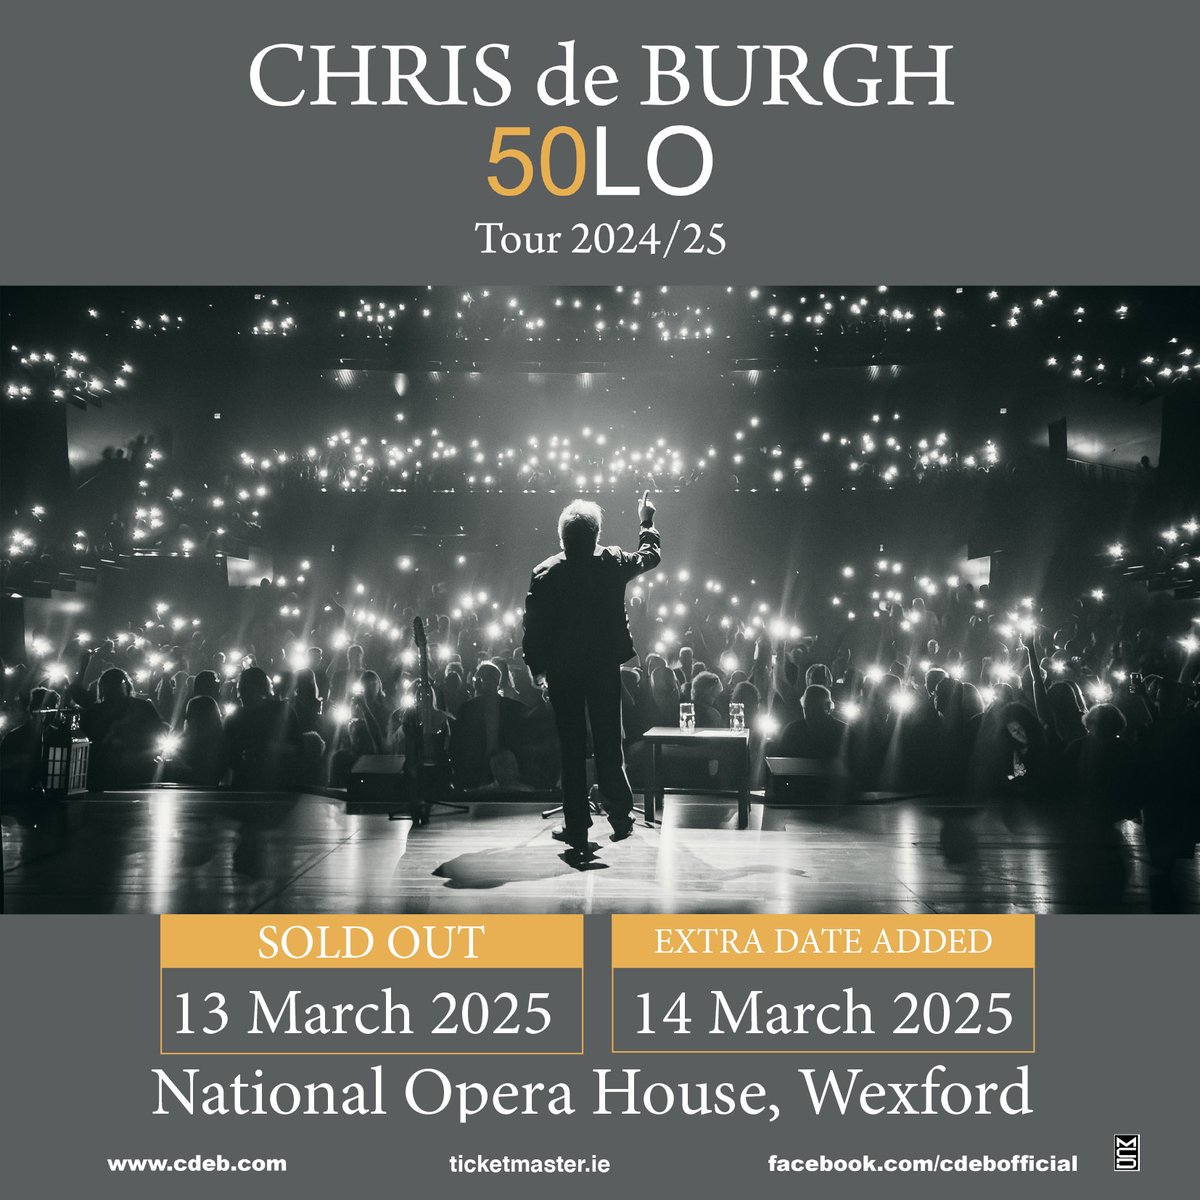 ⭐SECOND DATE ON SALE⭐ Chris de Burgh's second date; Friday 14 March 2025, is now on sale! 🥳🤩 Tickets: €69.90 + Facility Fee 👉 rebrand.ly/vxdukqy